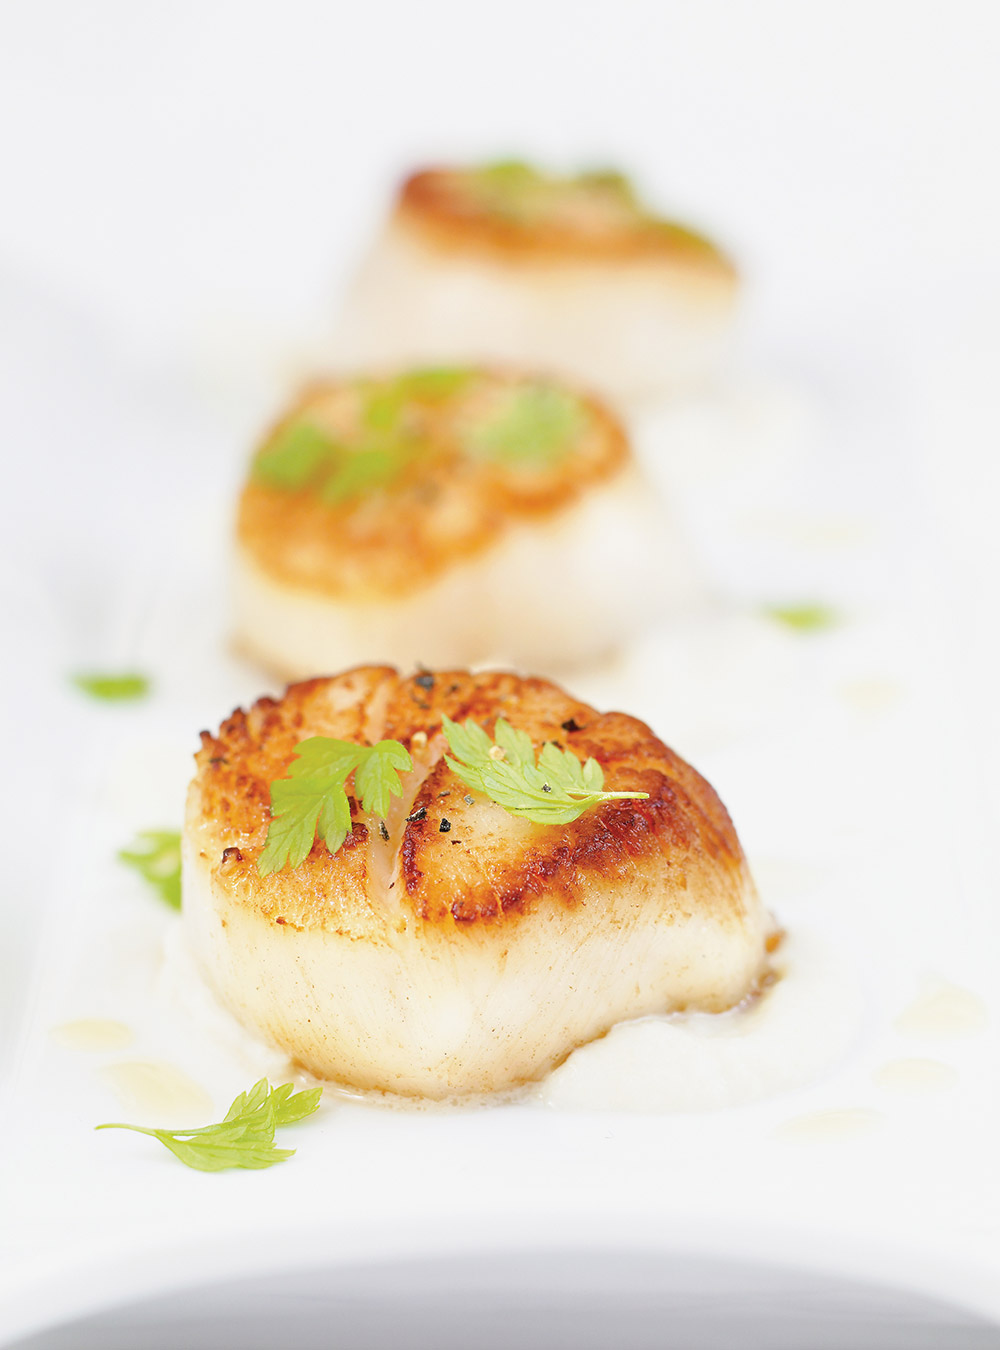 Seared Scallops on Celery Root Purée